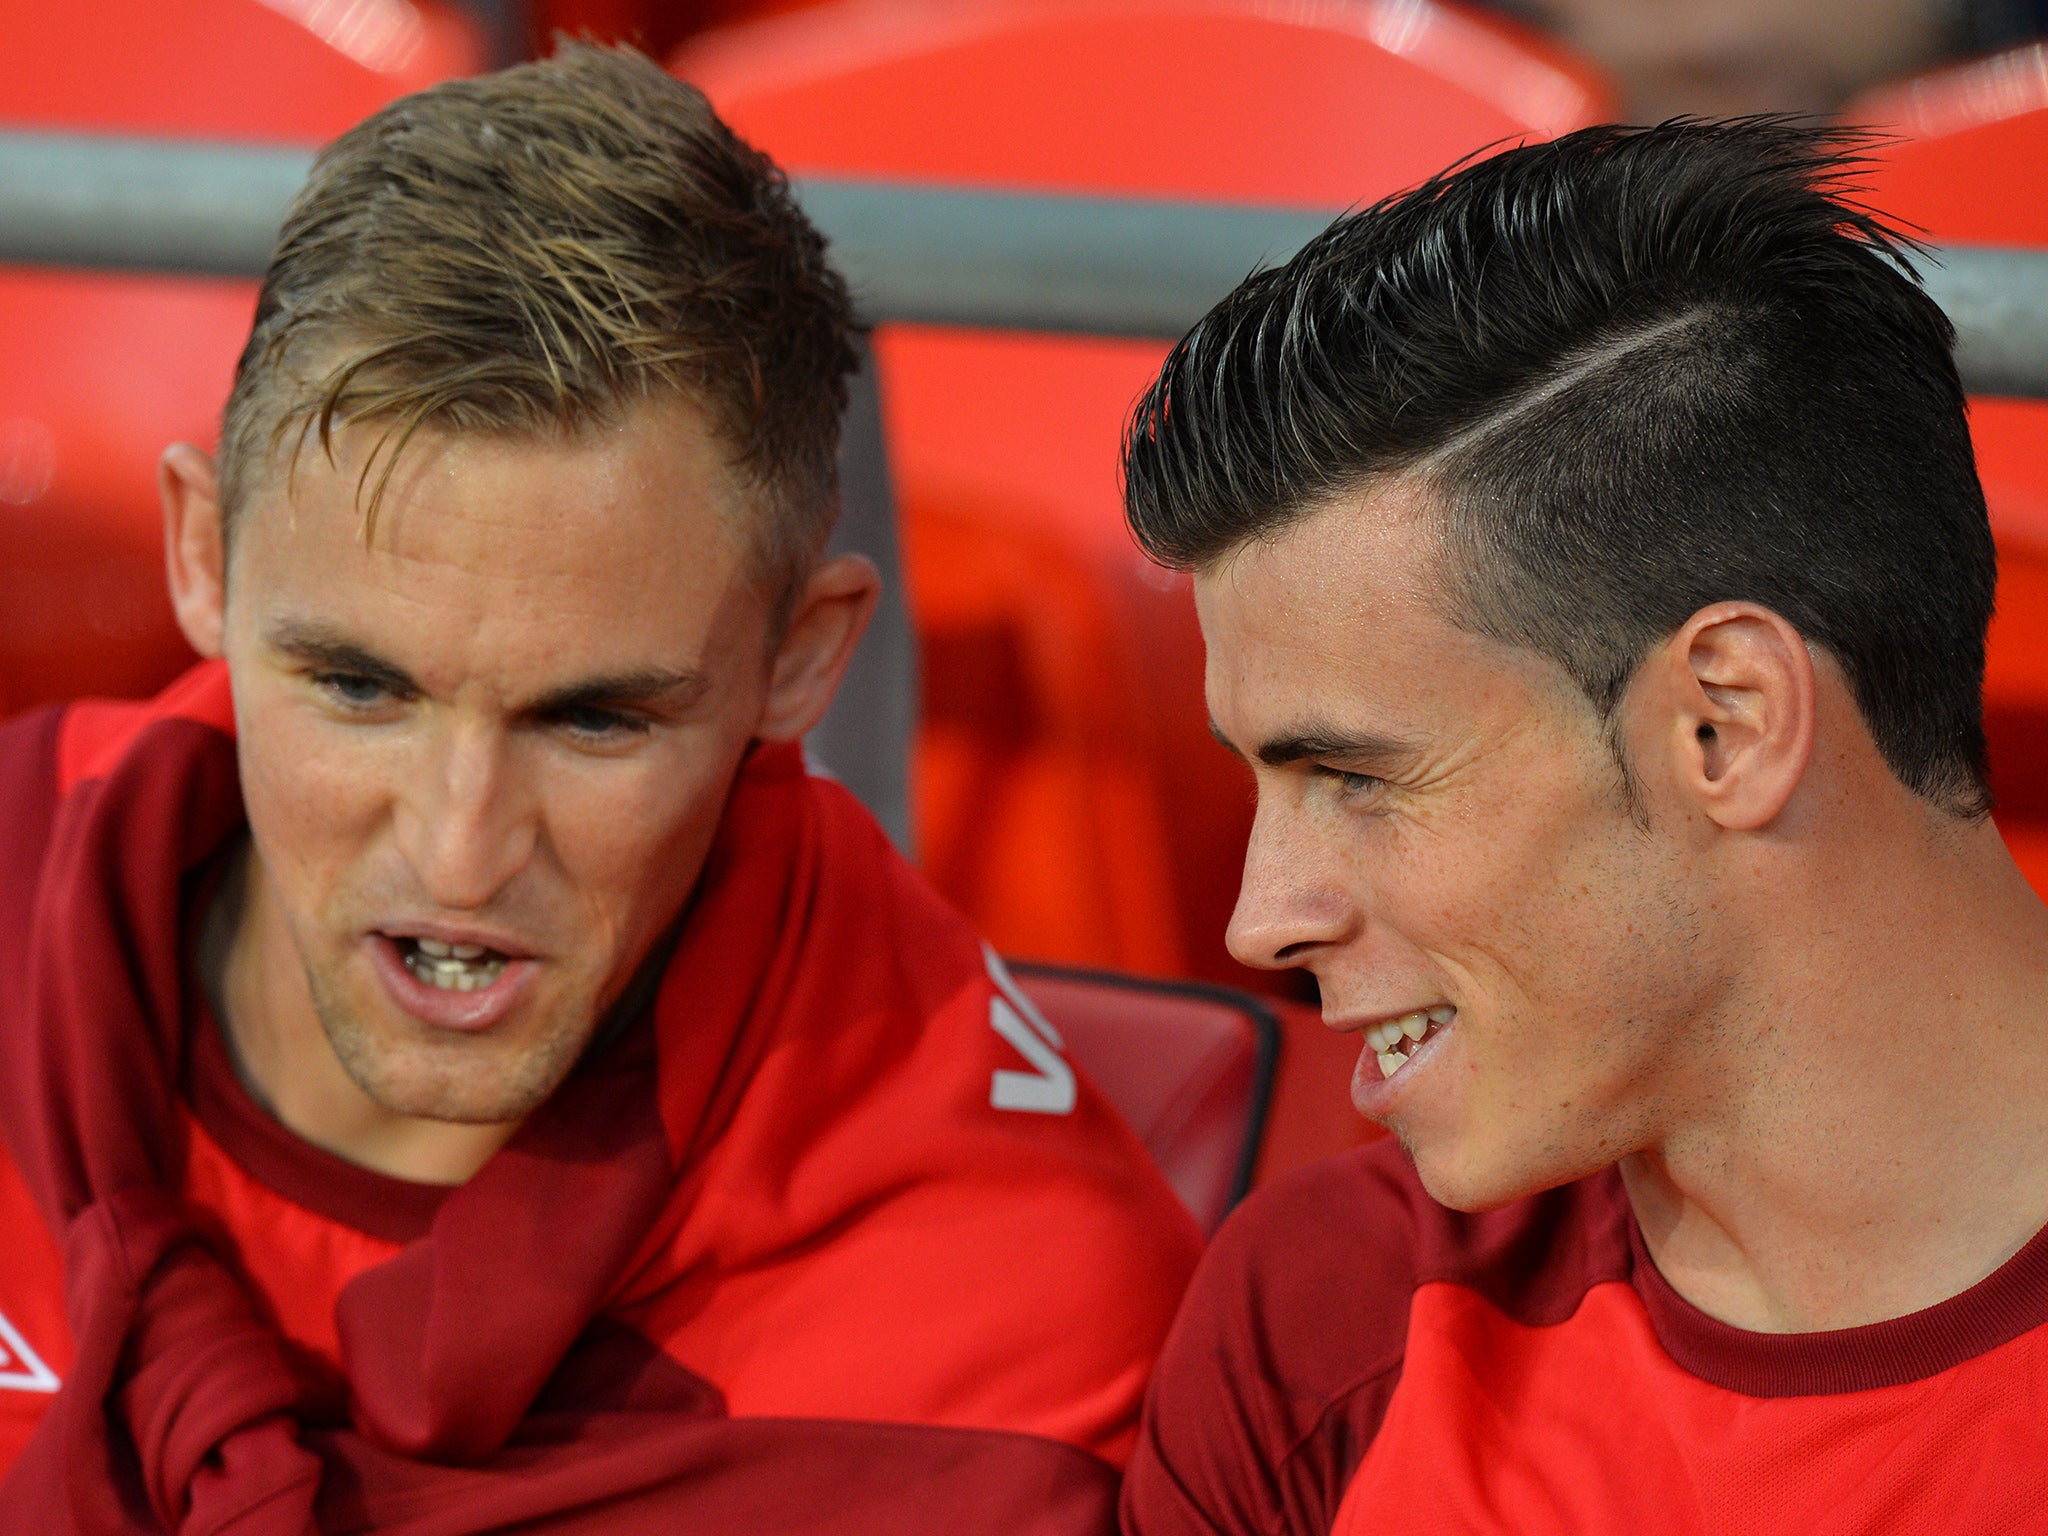 If not for his injury problems, Collison could have represented Wales at Euro 2016 this summer alongside Gareth Bale